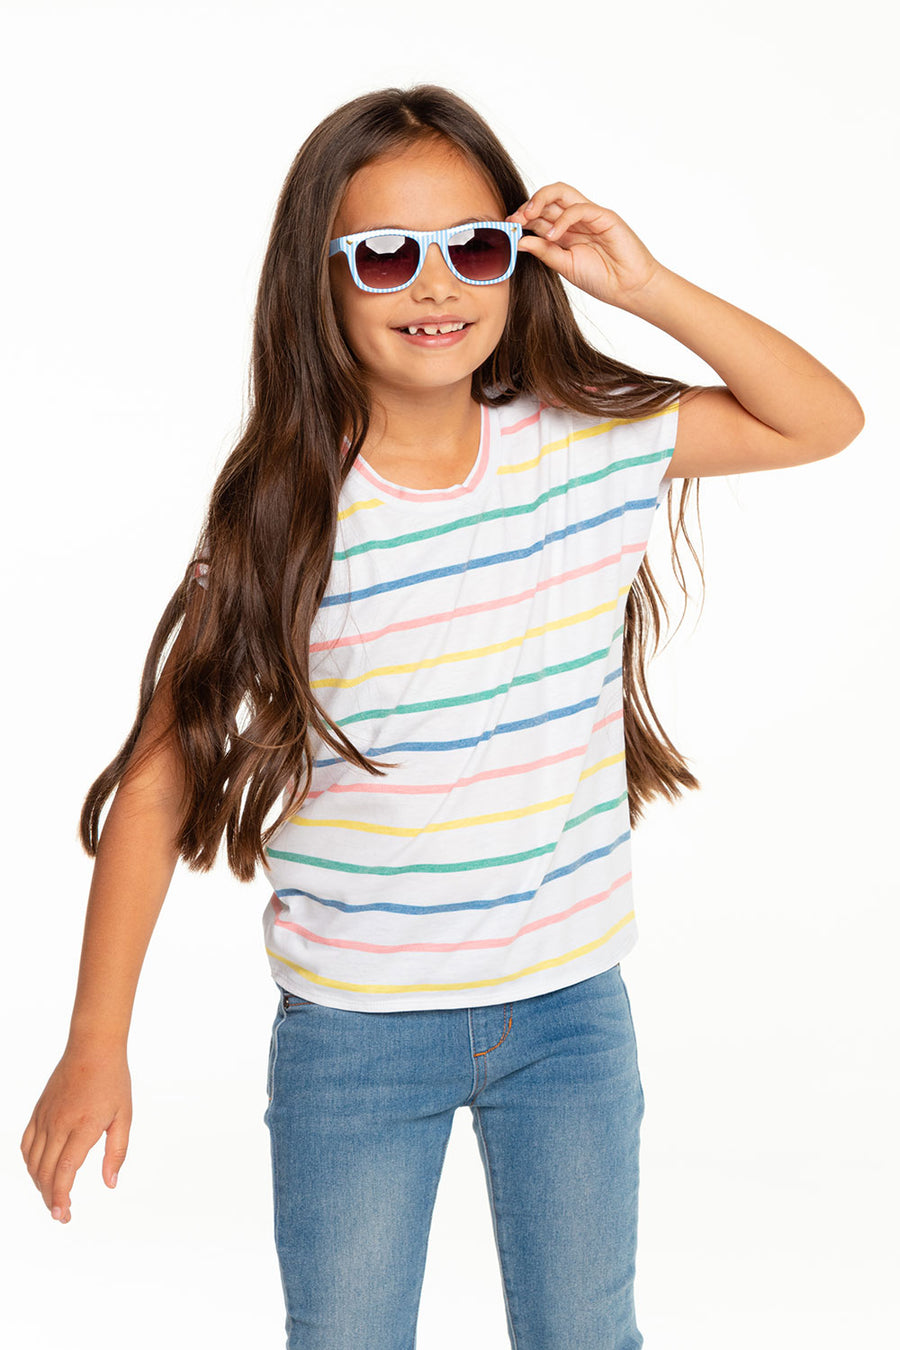 Girls Recycled Vintage Jersey Cap Sleeve Vent Back Tee GIRLS - chaserbrand